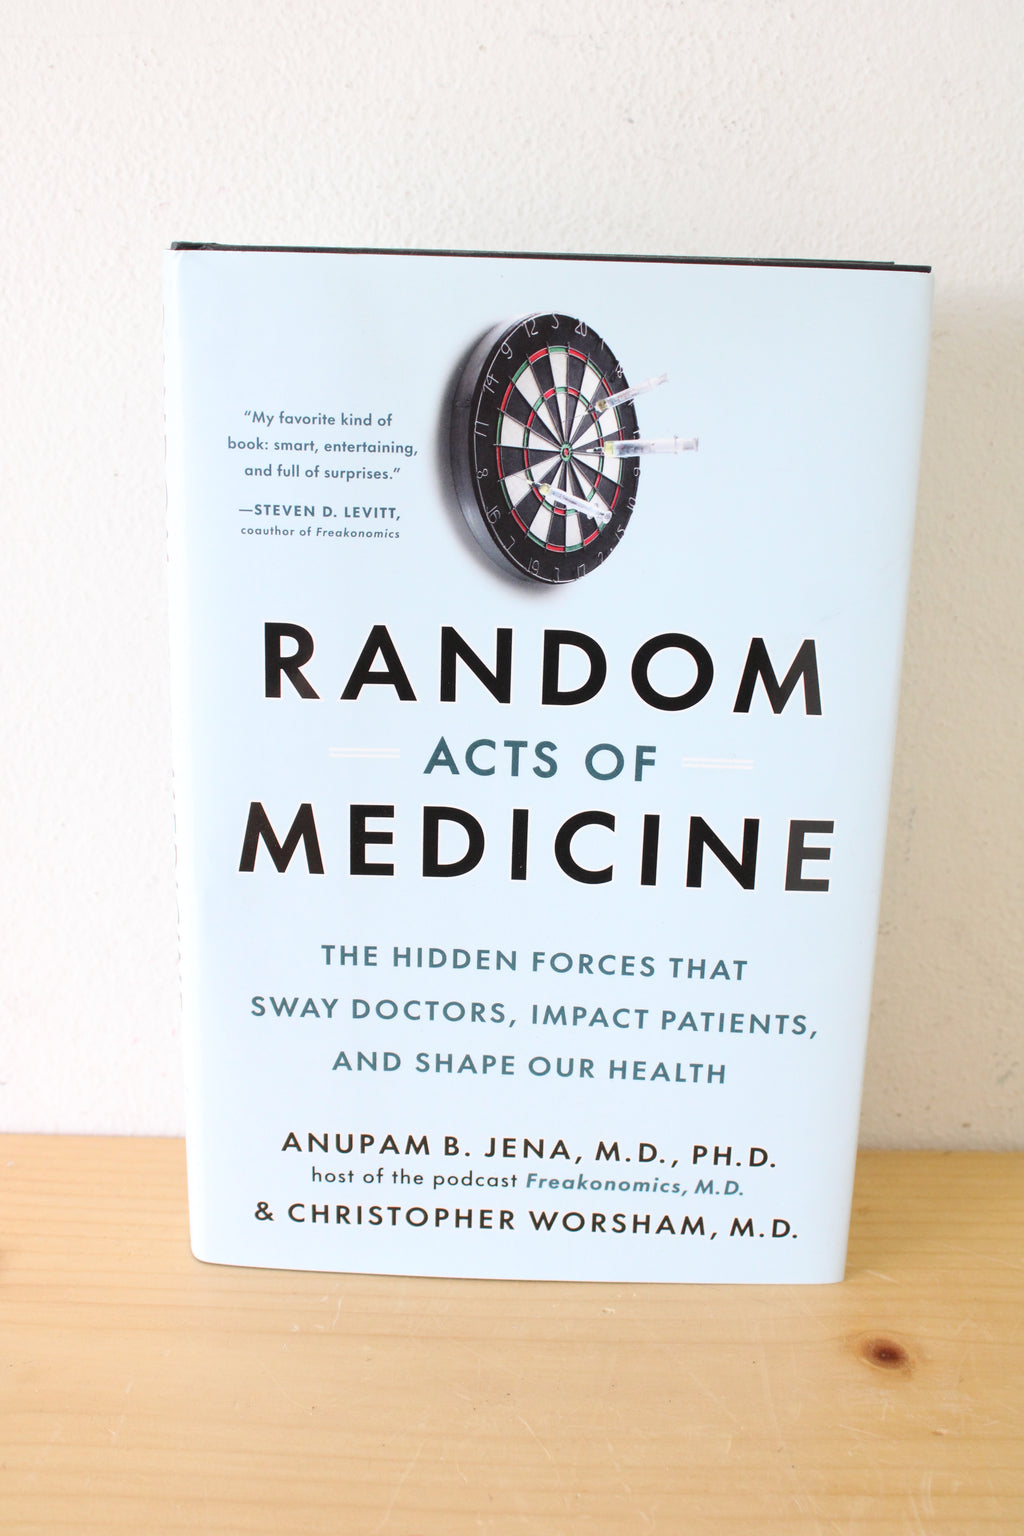 Random Acts Of Medicine: The Hidden Forces That Sway Doctors, Impact Patients, And Shape Our Health By Anupam B. Jena & Christopher Worsham